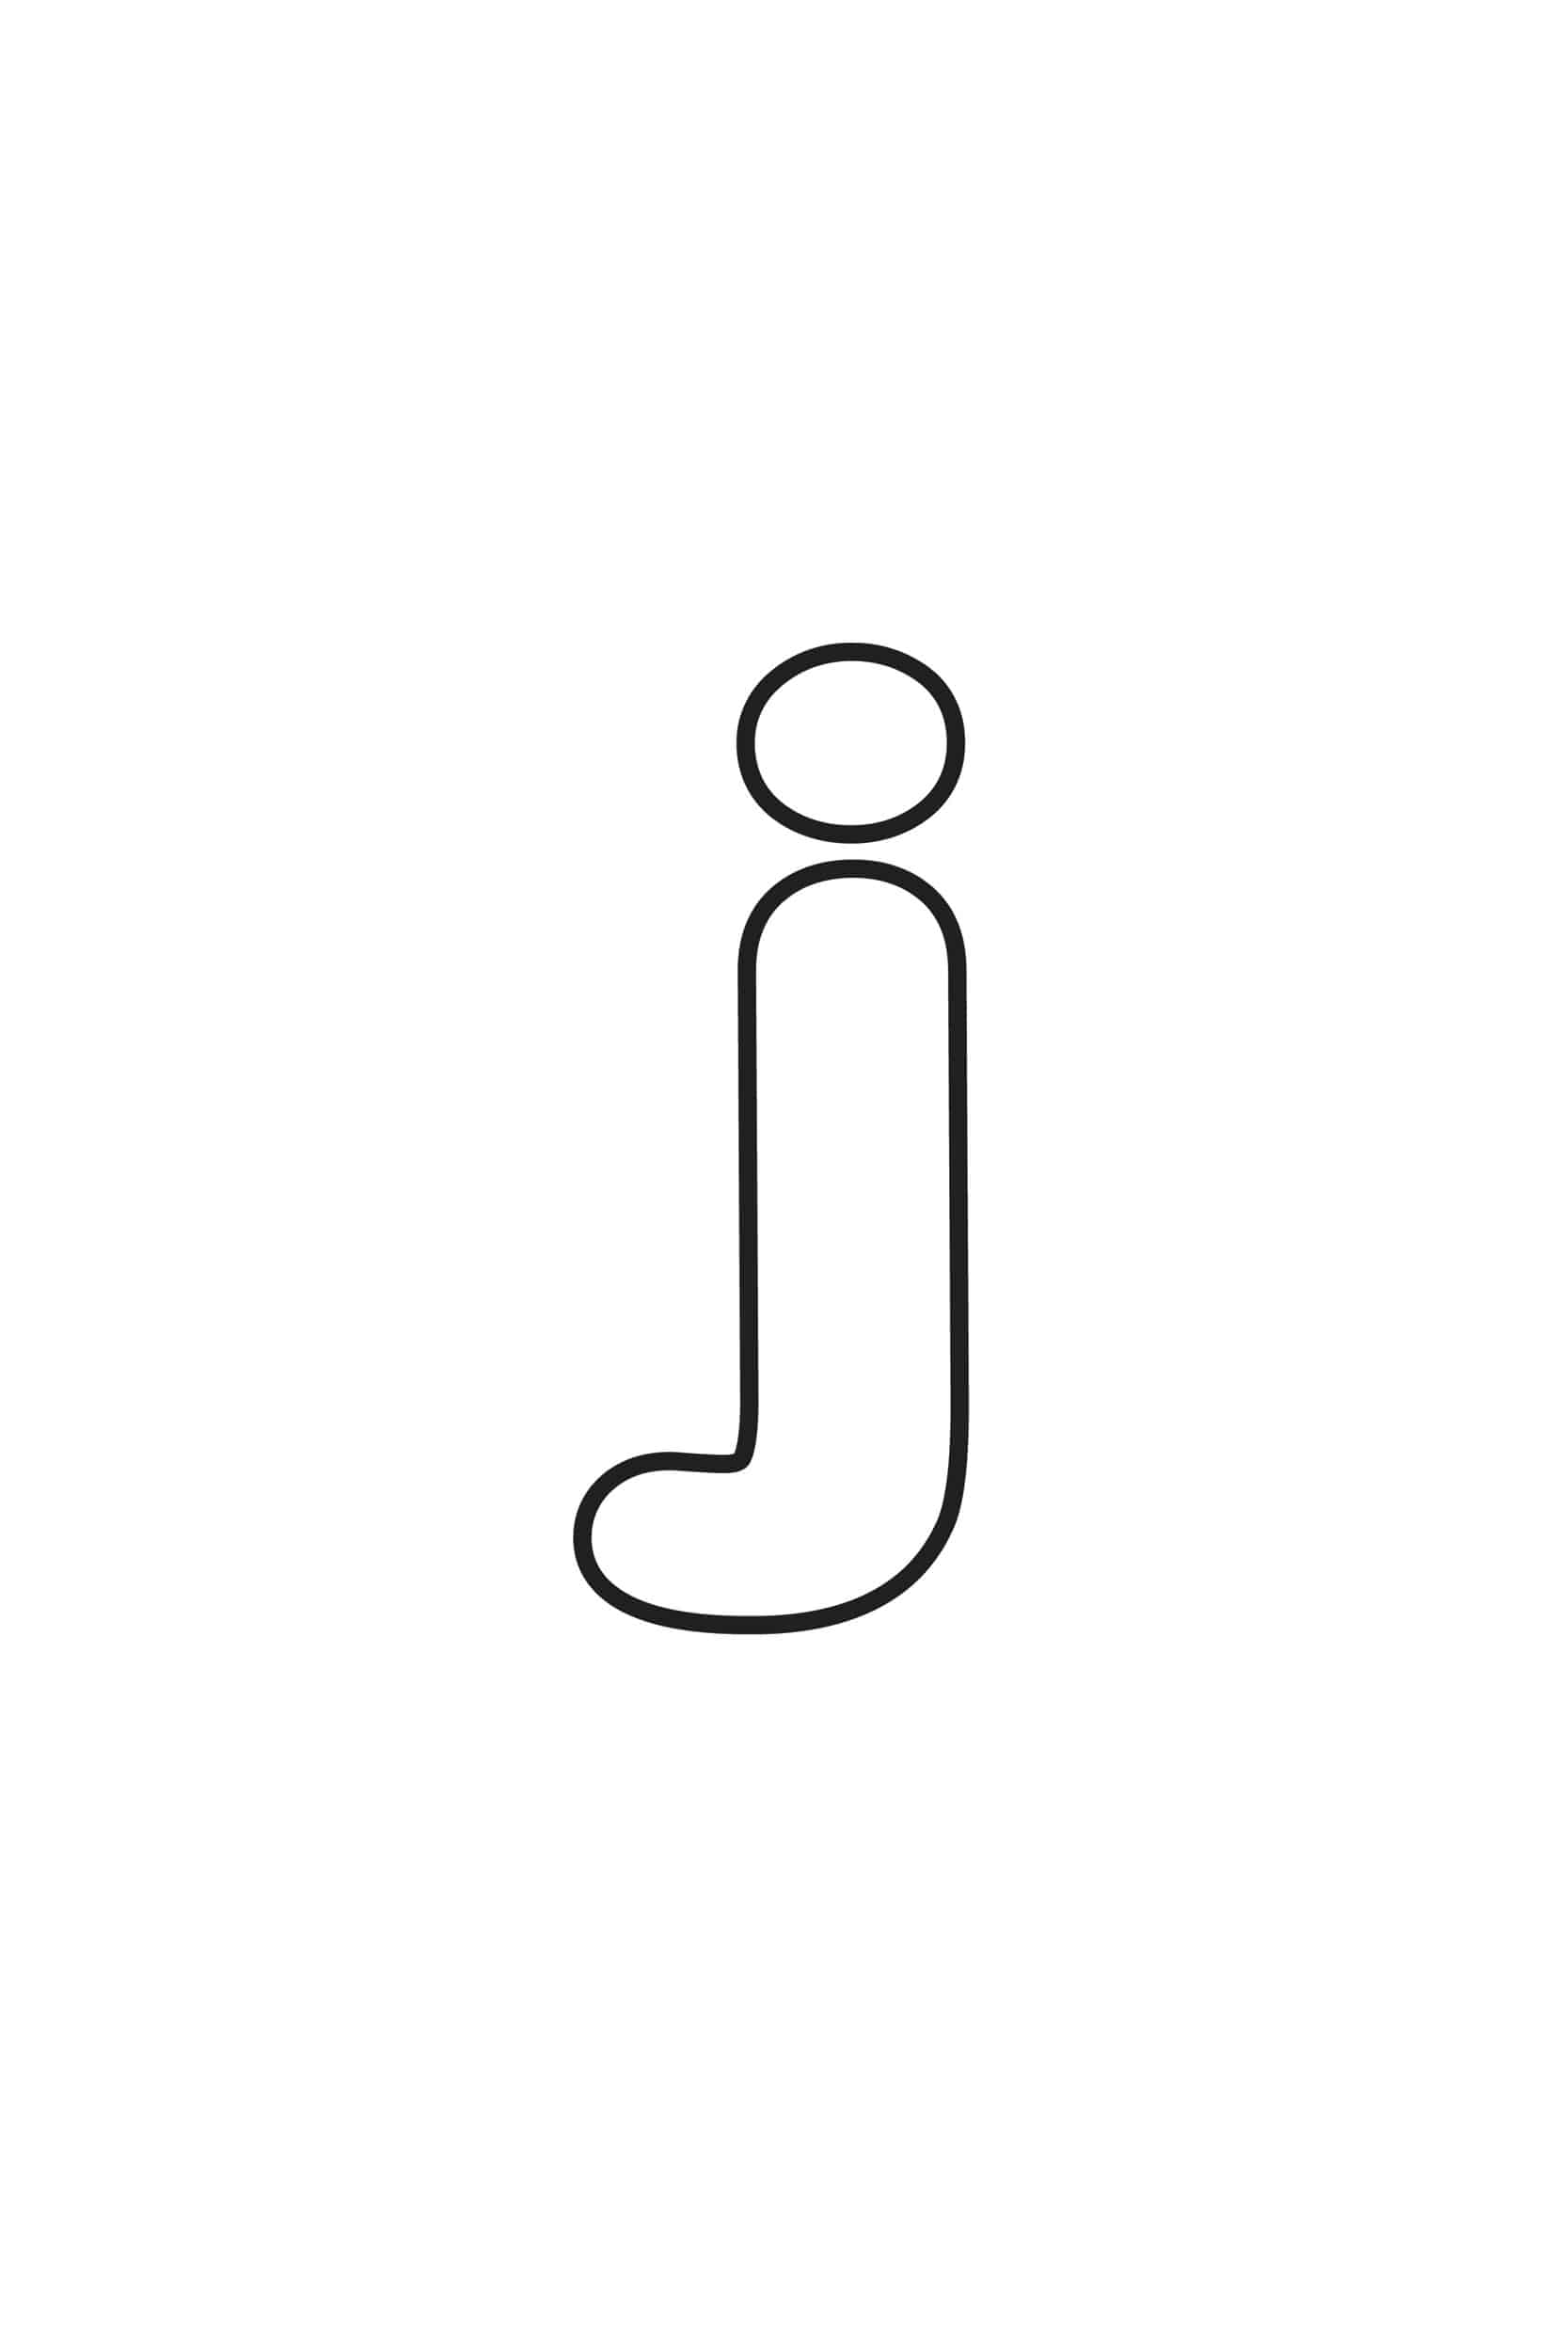 Free Printable Lowercase Bubble Letters Lowercase J 